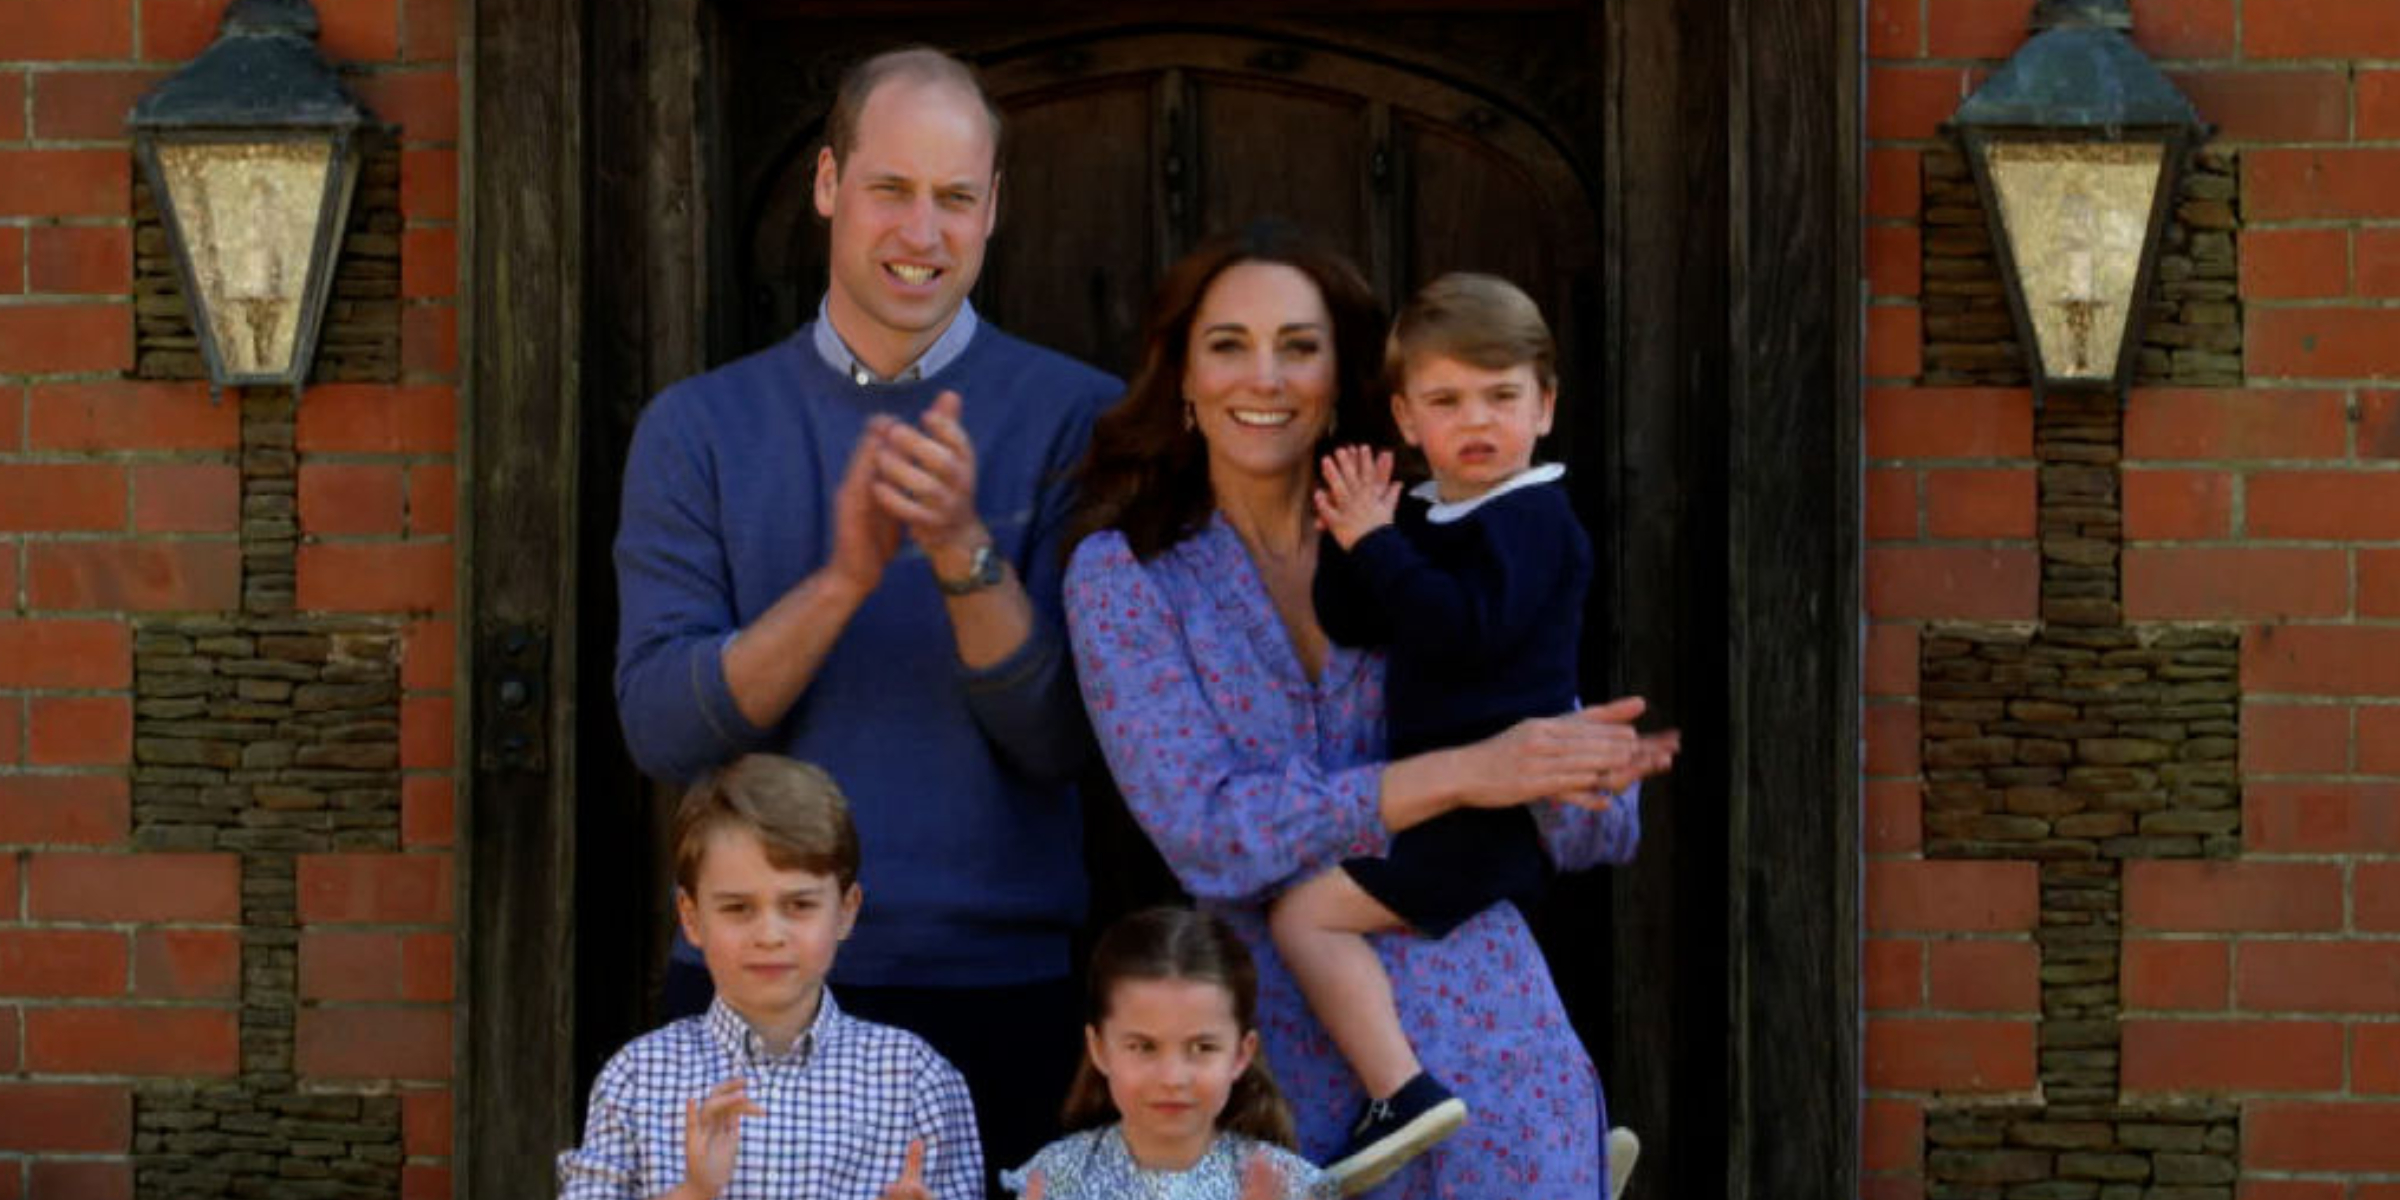 Prince George, Prince William, Princess Charlotte, Kate Middleton and Prince Louis | Source: Getty Images